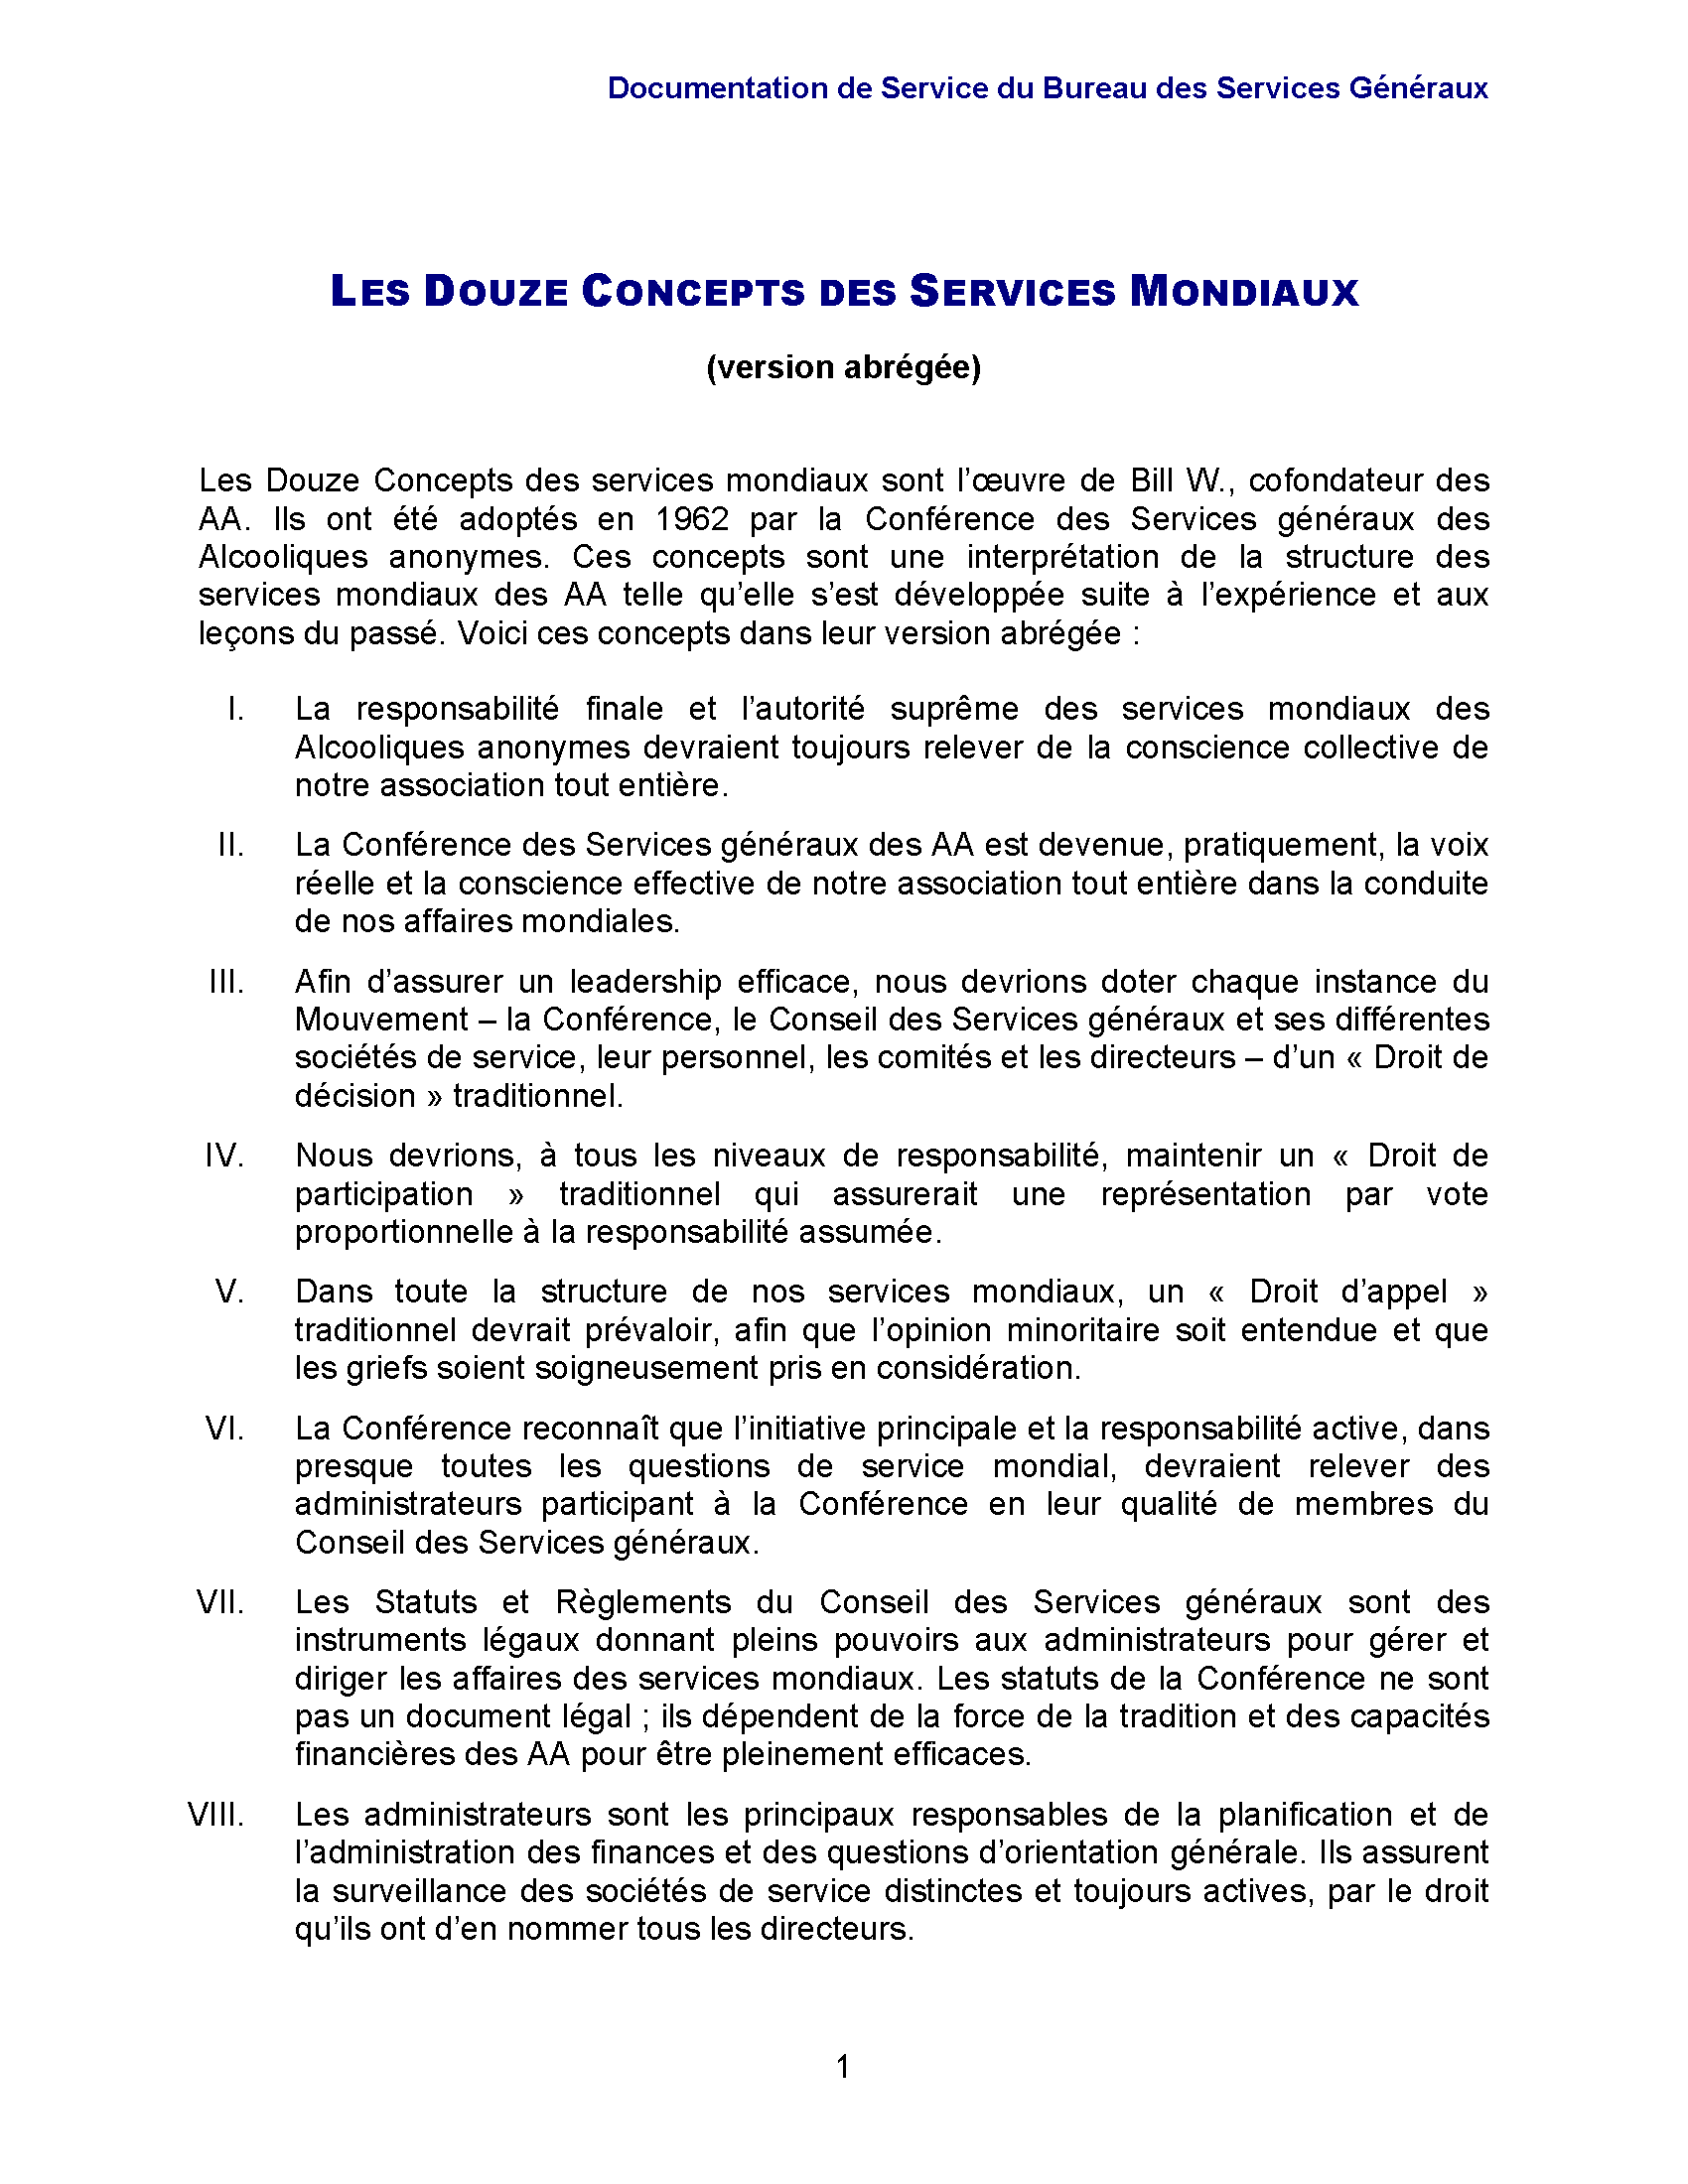 Service manual 12 concepts image french